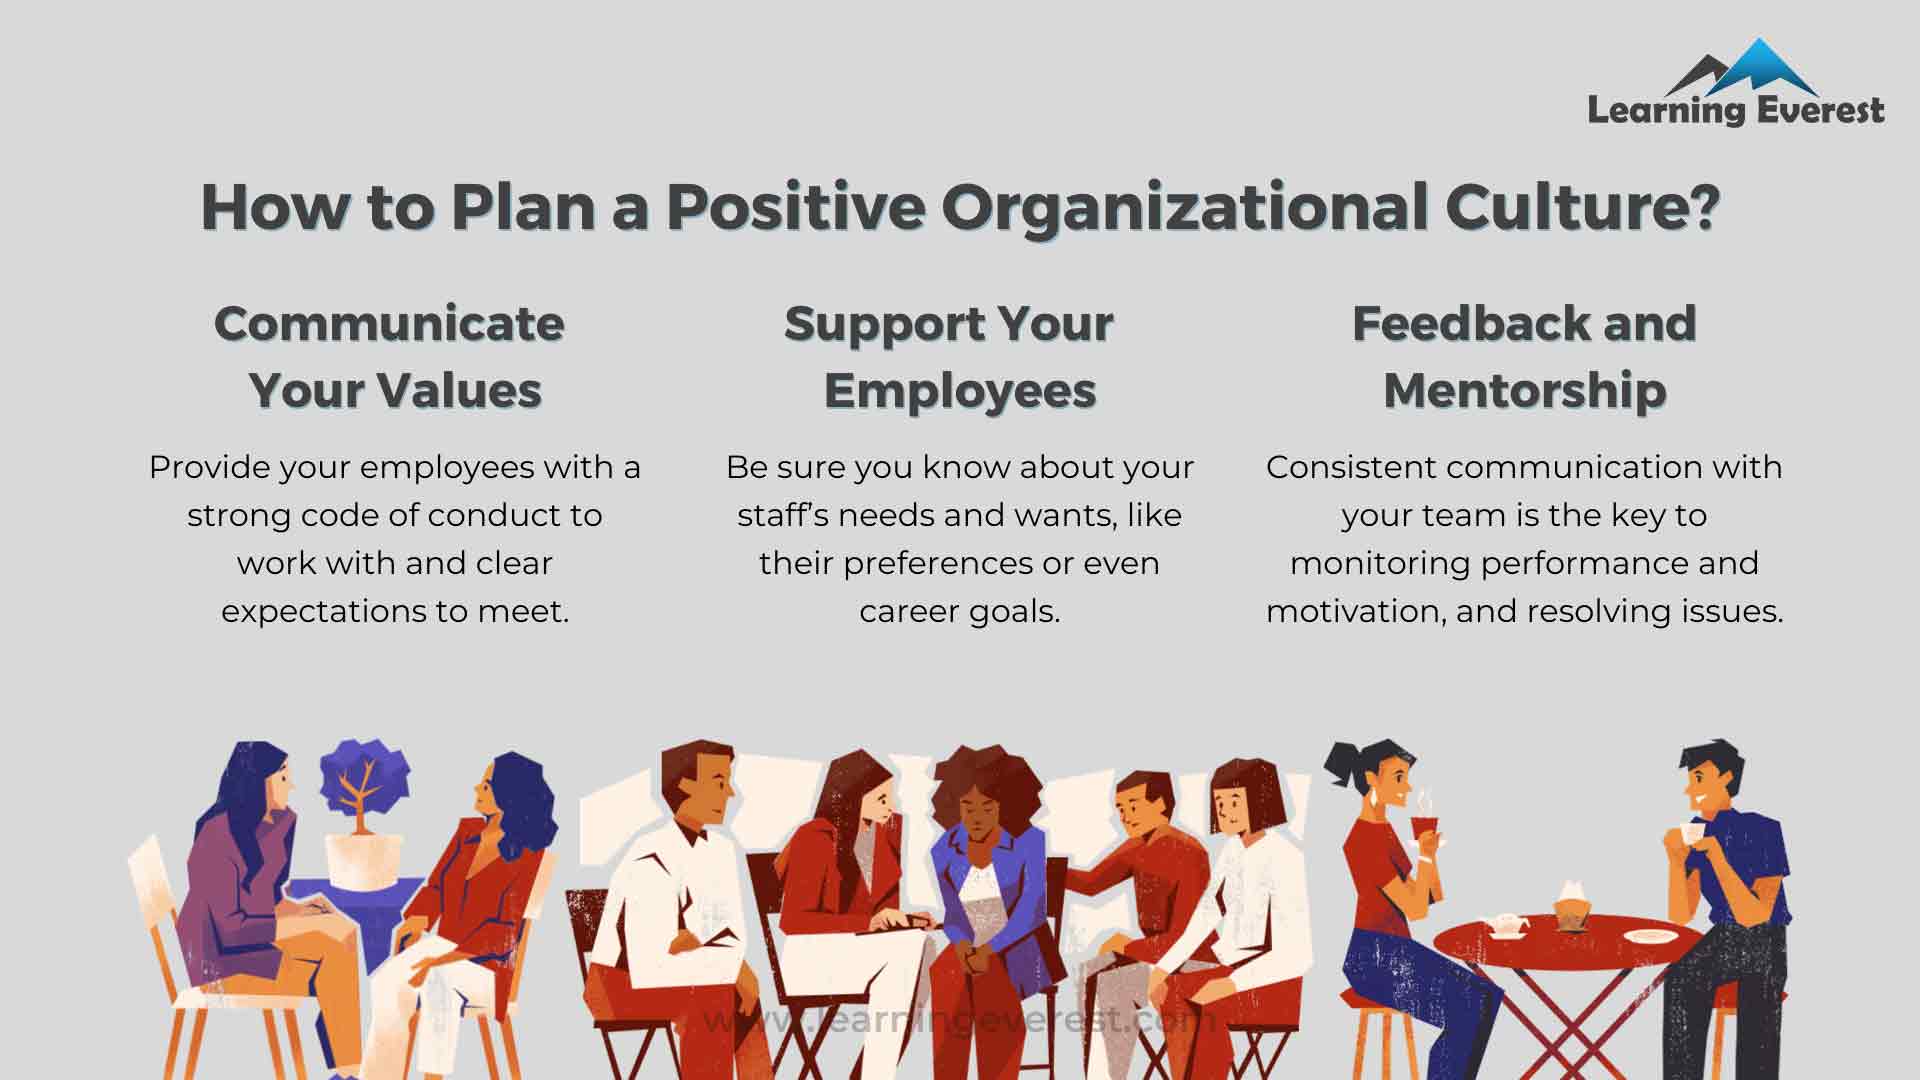 How to Plan a Positive Organizational Culture